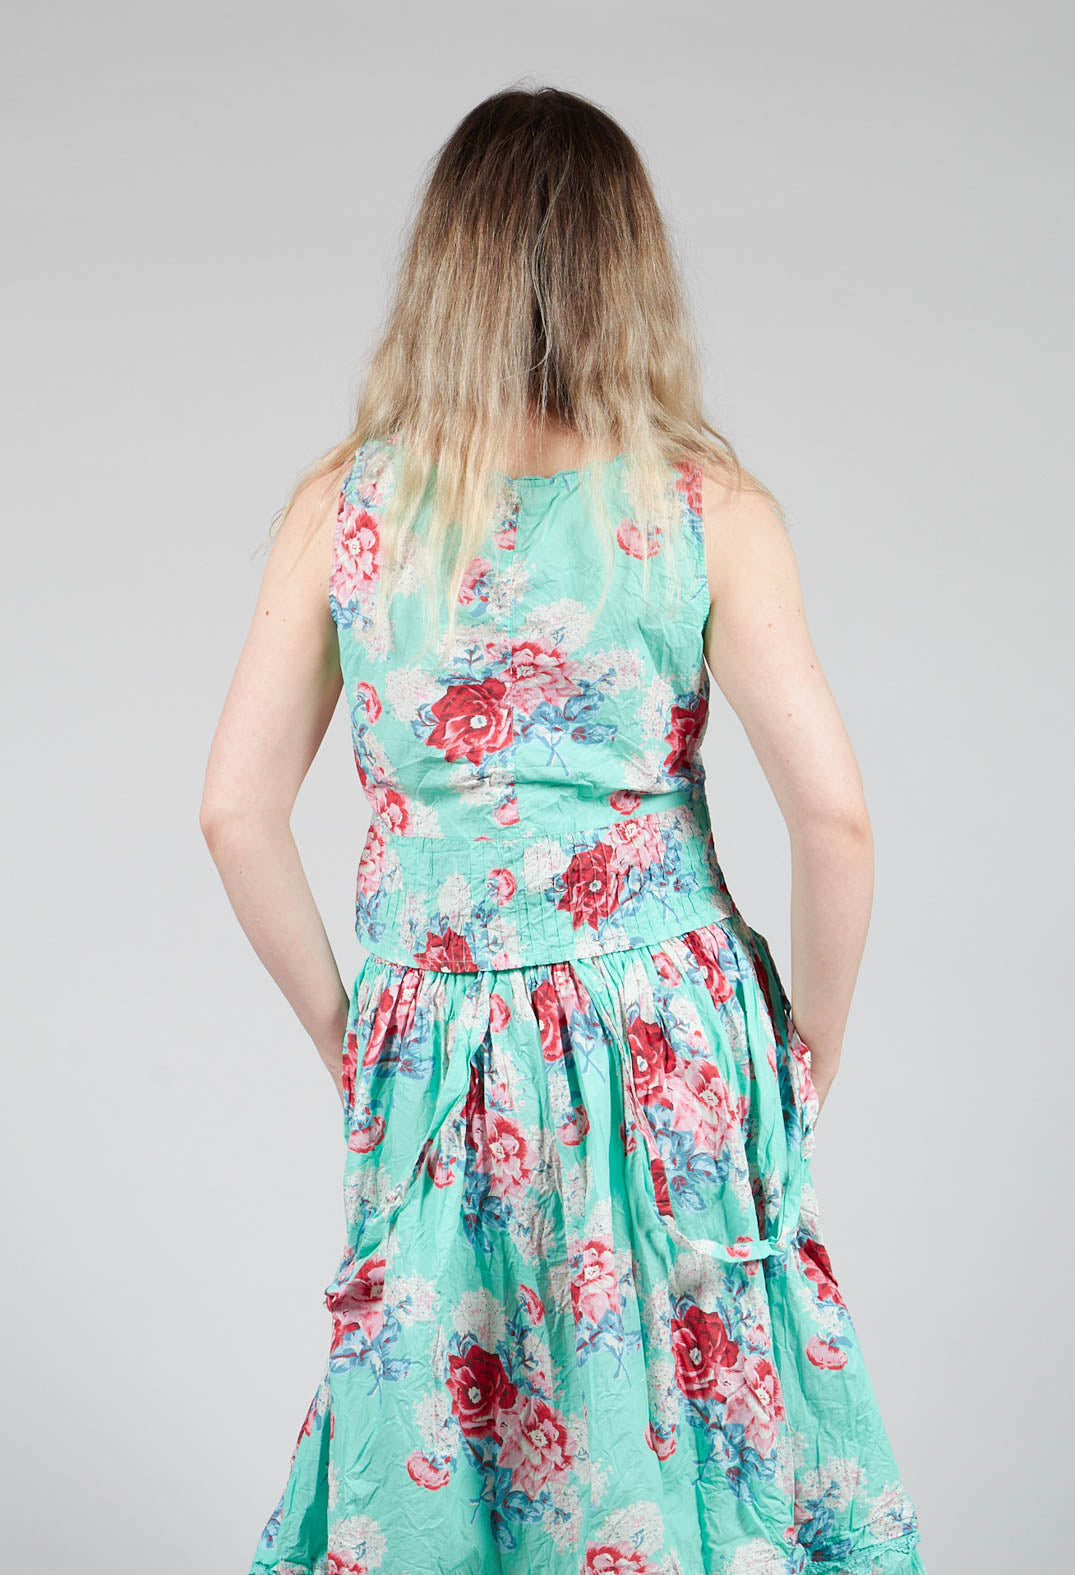 Livia Top in Turquoise Flower